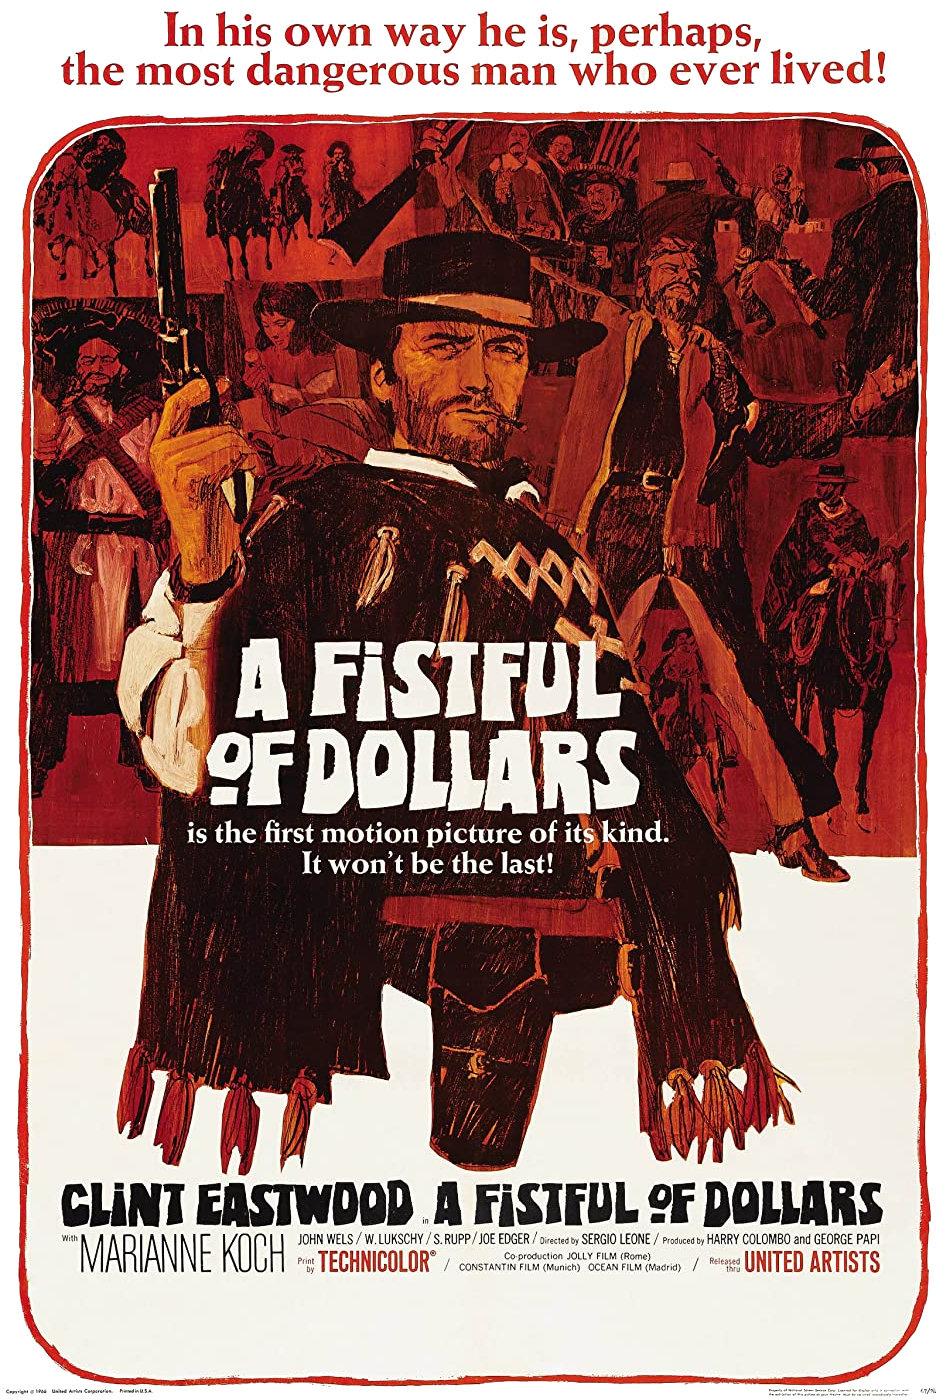 A fistfull of dollars